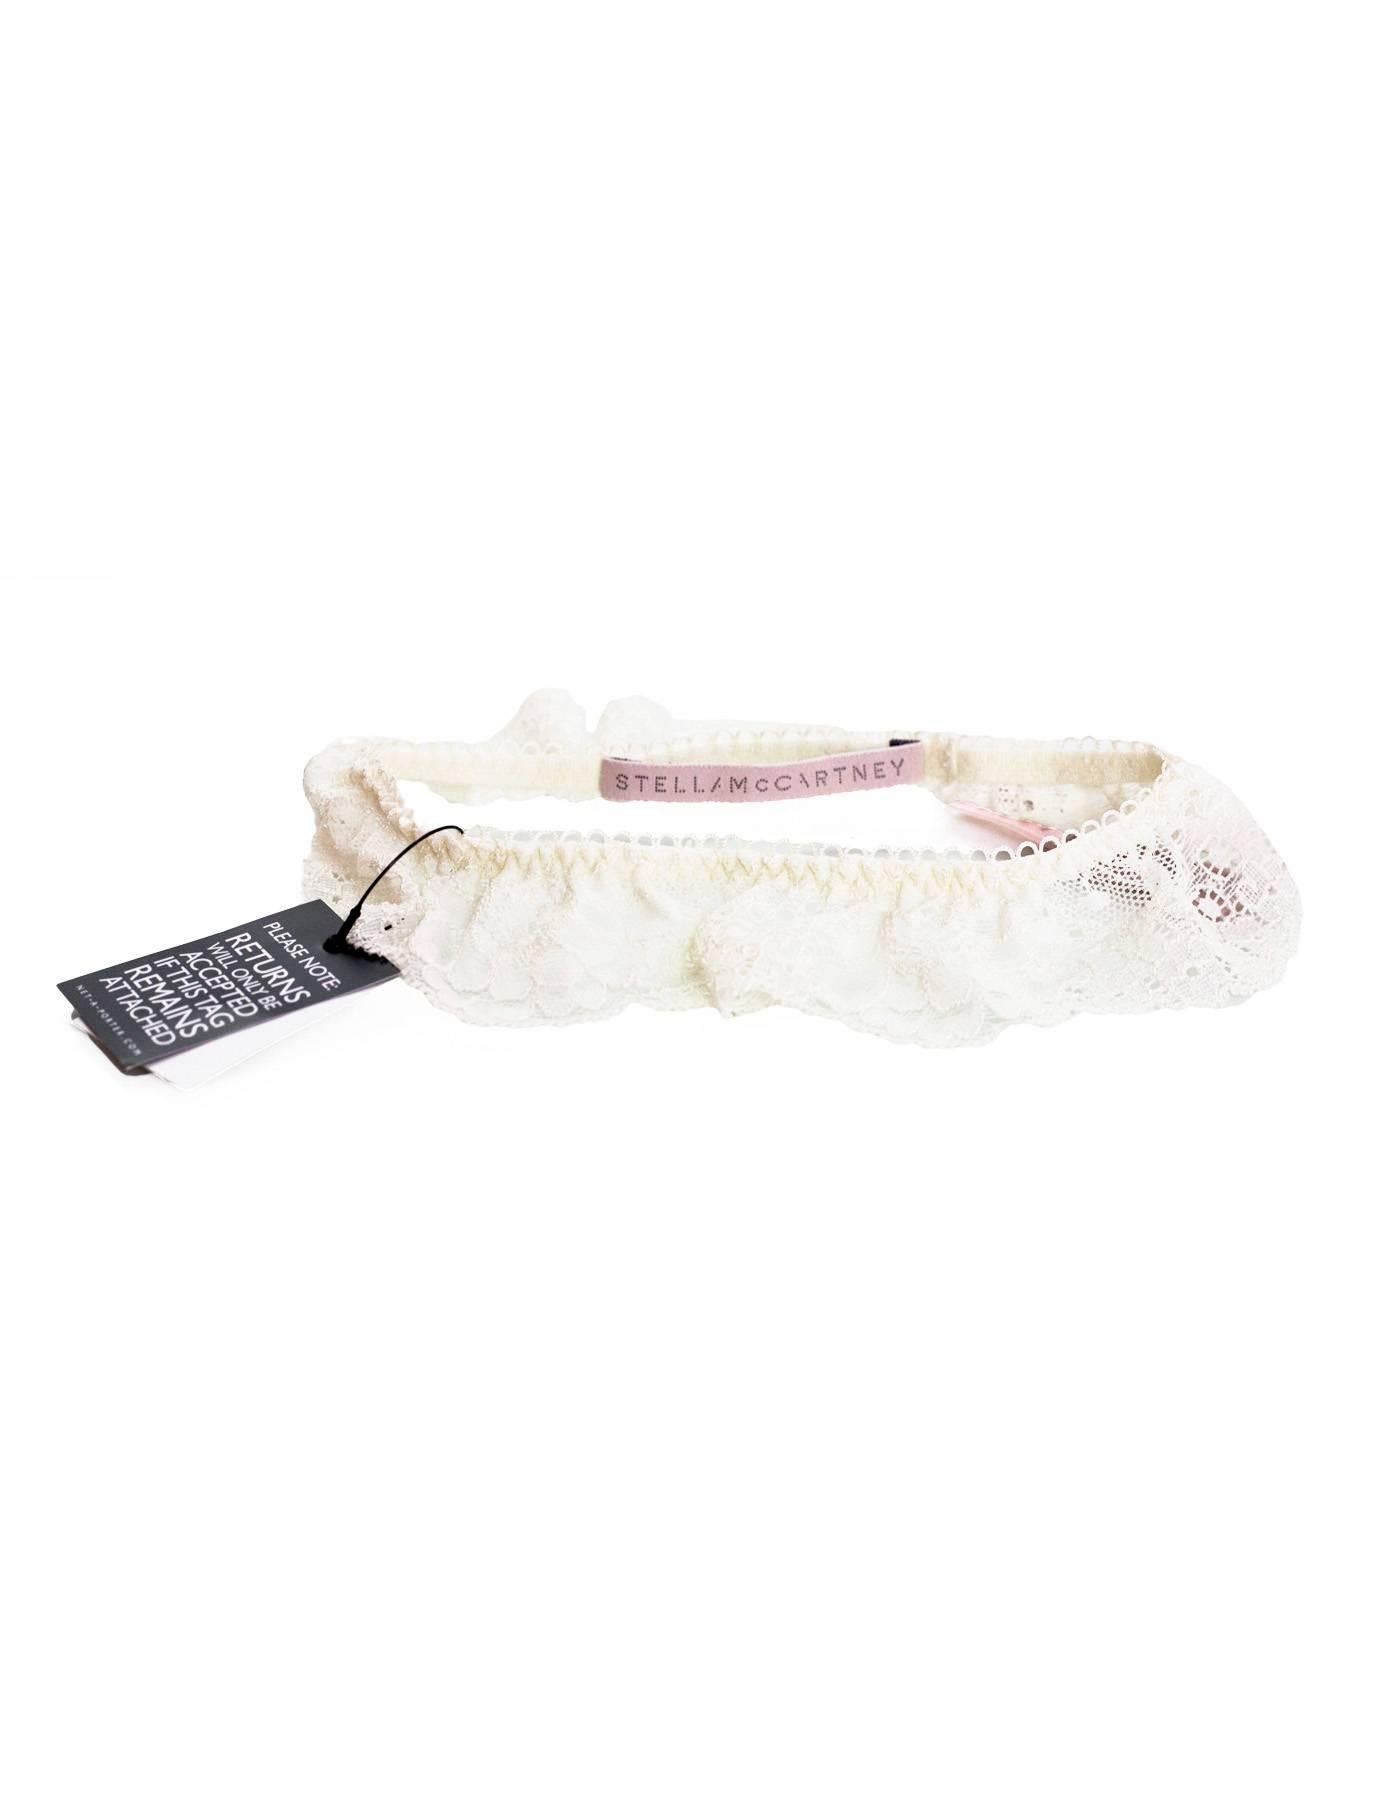 Stella McCartney White Lace Garter Belt NWT

Made In: China
Color: White
Materials: 89% Polyamide,11% elastane
Closure/Opening: Stretch elastic
Retail Price: $40 + tax
Overall Condition: Excellent pre-owned condition - NWT
Includes: Tags

Marked